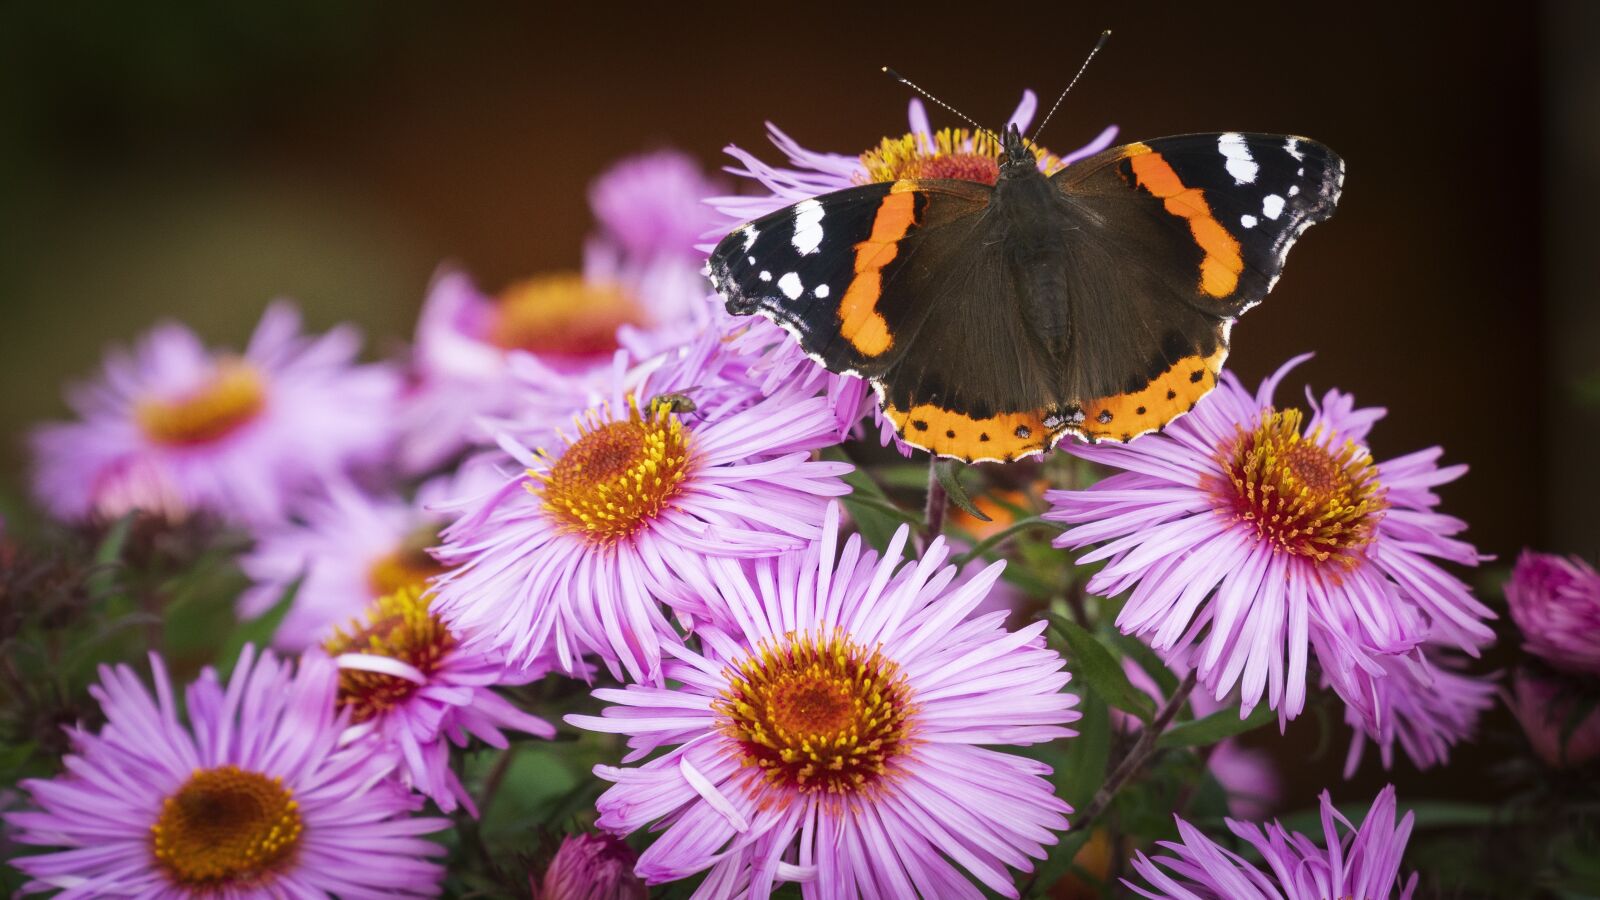 Sony a6300 sample photo. Butterfly, flowers, red admiral photography